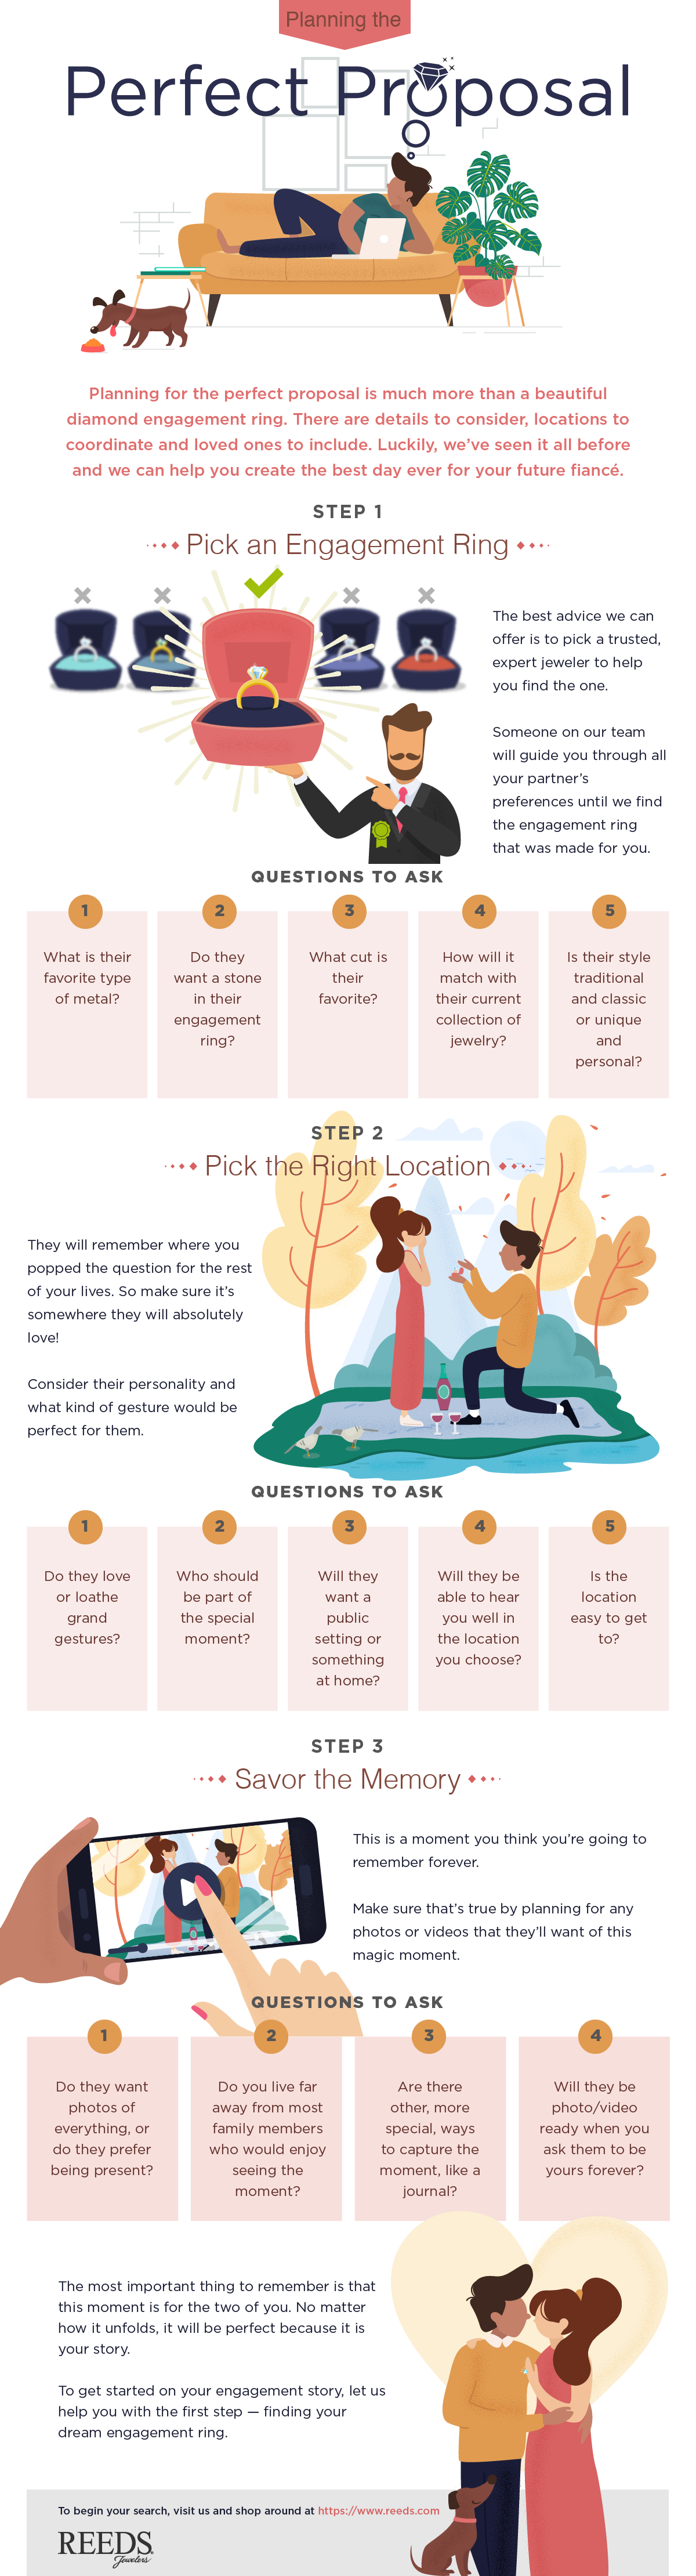 The Perfect Proposal - Infographic